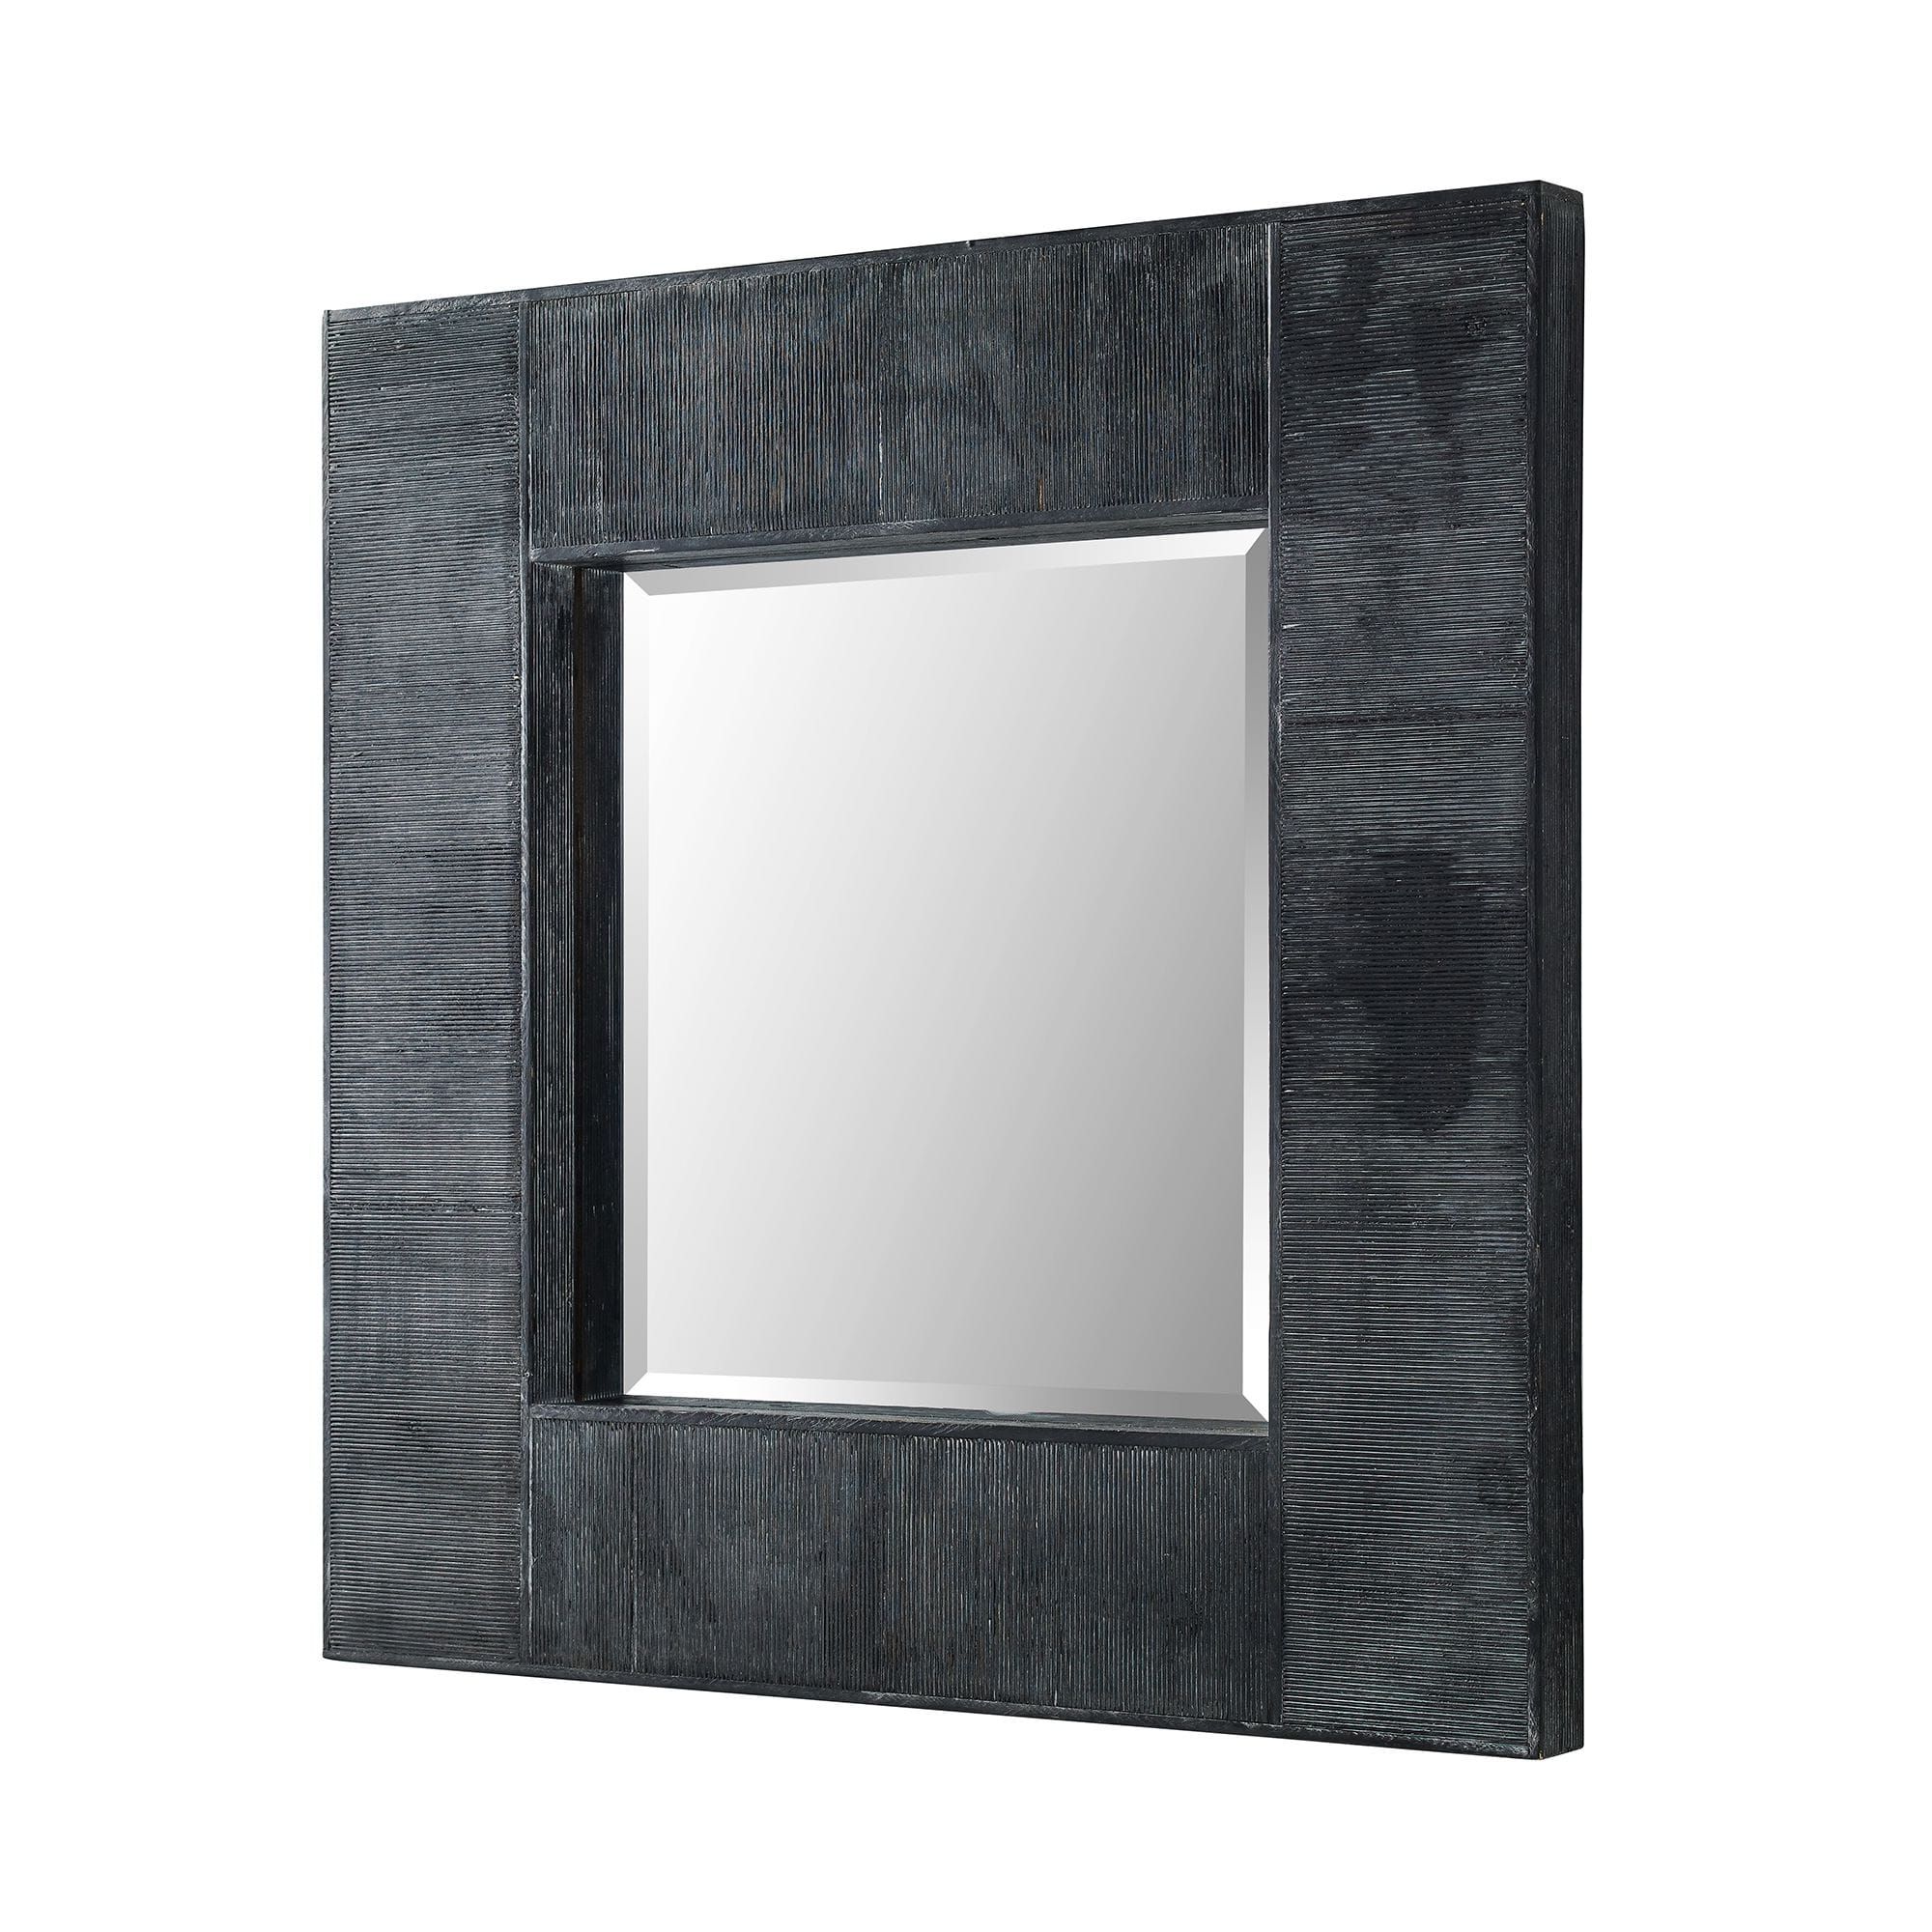 Widely Used 32 Inch Modern Industrial Square Wall Mirrorwalker Edison Pertaining To Black Square Wall Mirrors (View 9 of 15)